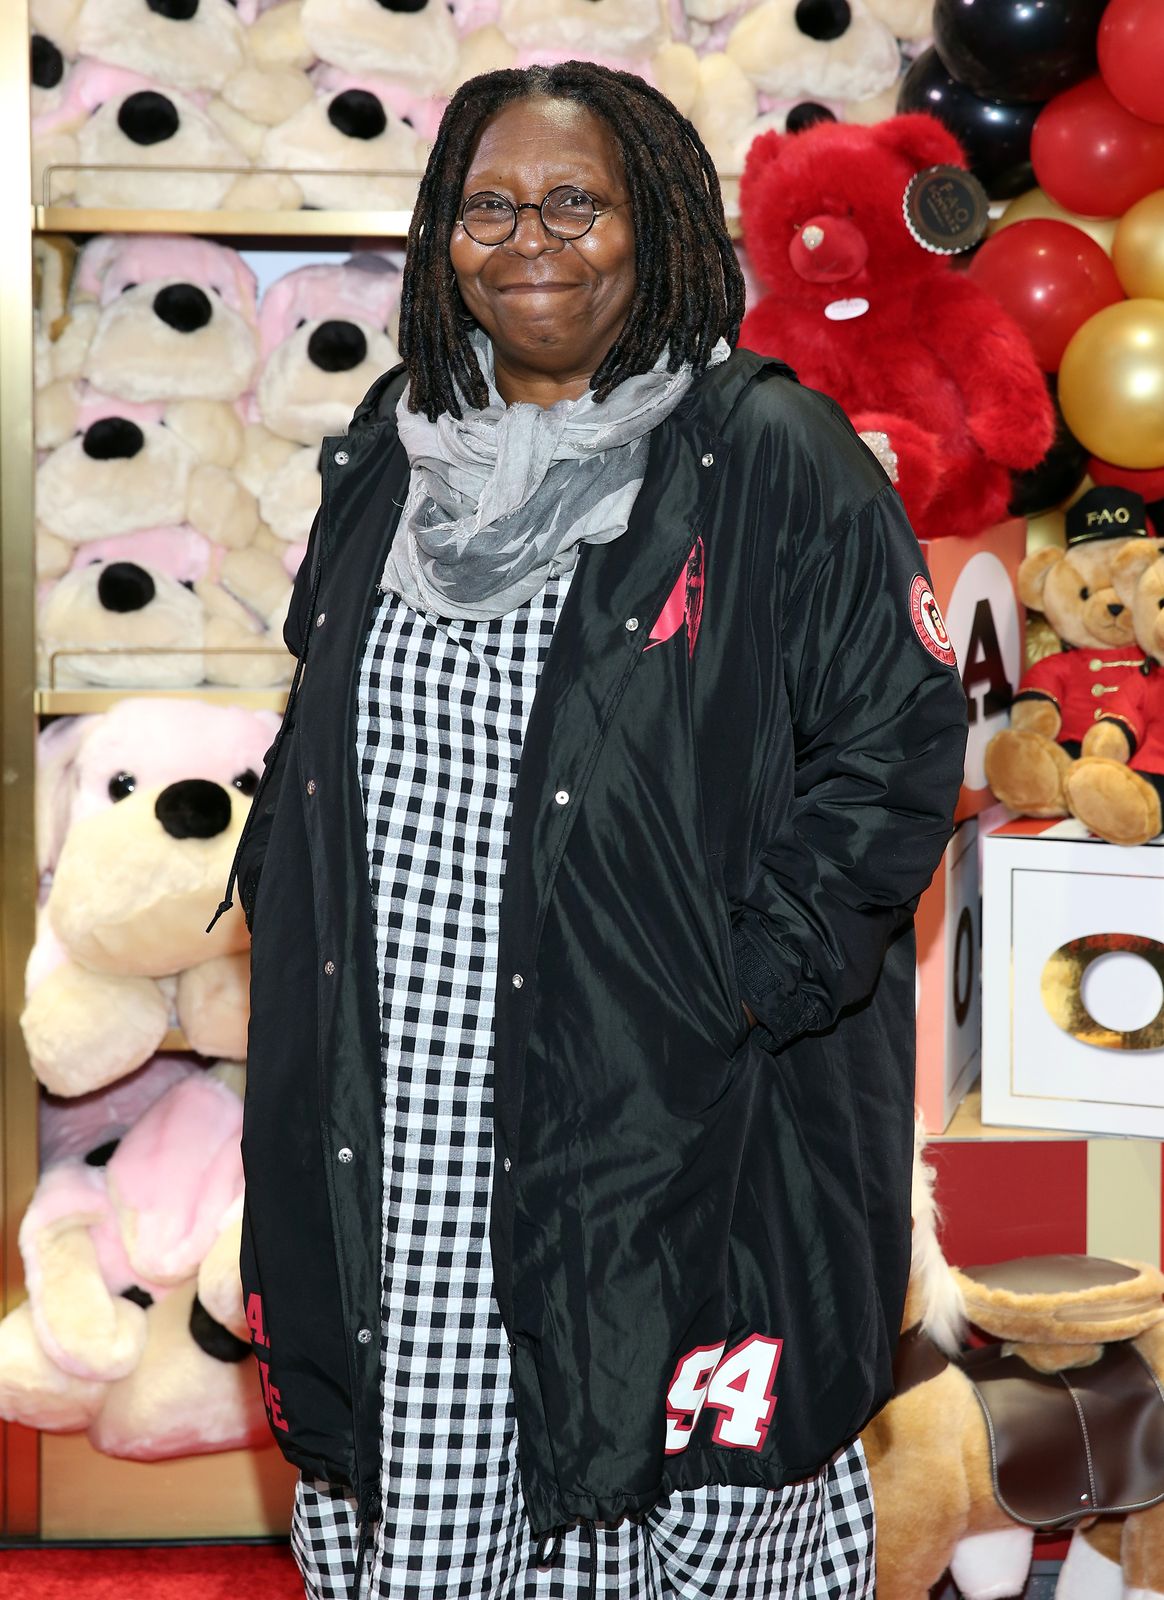 Whoopi Goldberg at the FAO Schwarz Grand Opening Event on November 15, 2018, in New York City | Photo: Monica Schipper/Getty Images